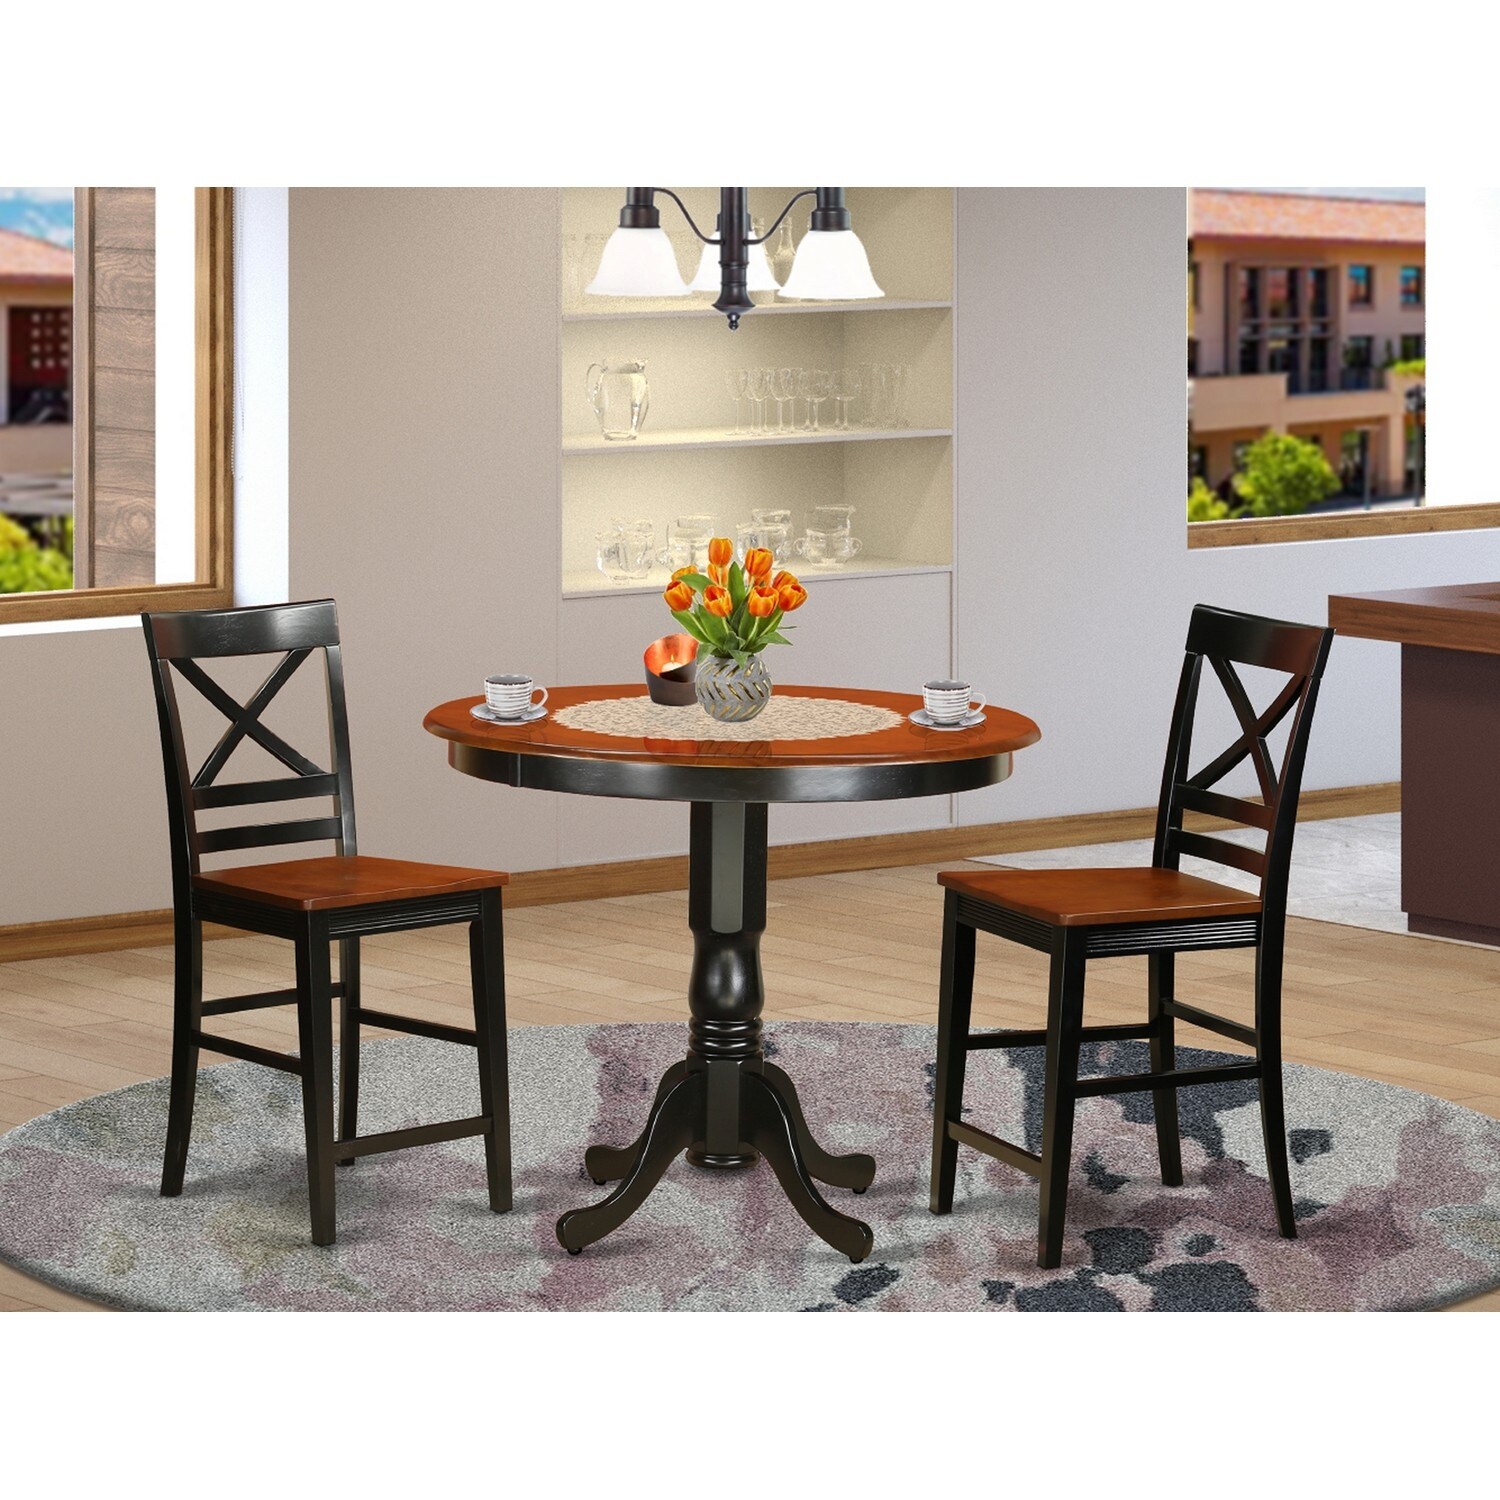 East West Furniture Rubberwood Counter Height Pub Set A Table And Counter Height Chairs (color Options Available)